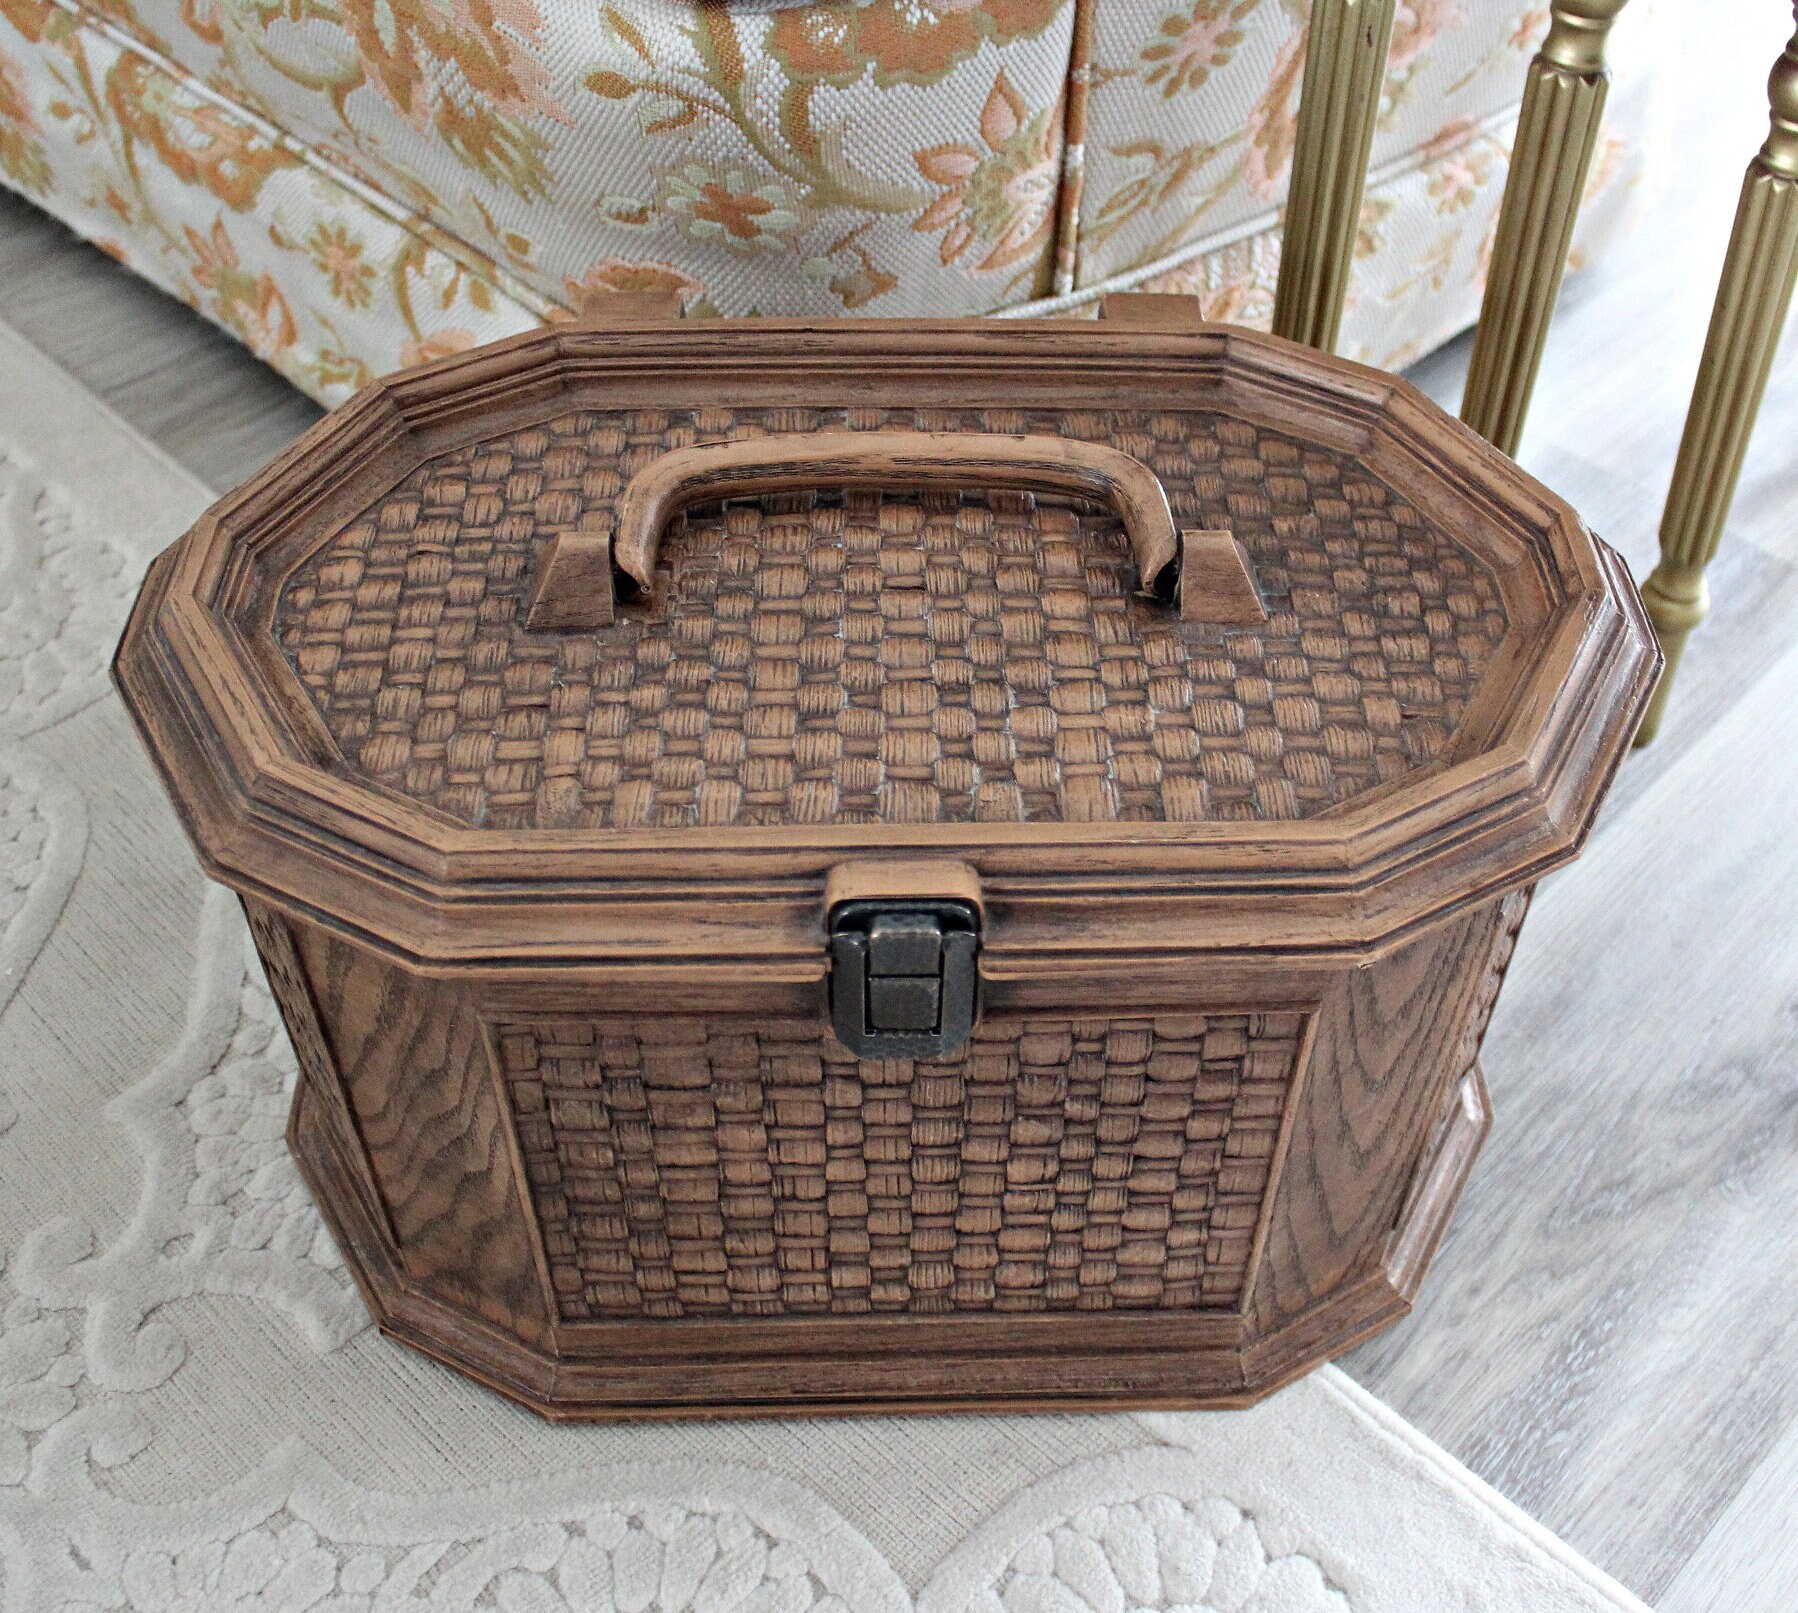 Vintage 70s Plastic SEWING BASKET Brown Lerner Brand Faux Wood Wicker Carry  CASE Storage Box Tiered Tray Train Cosmetics Make up Craft Bin 